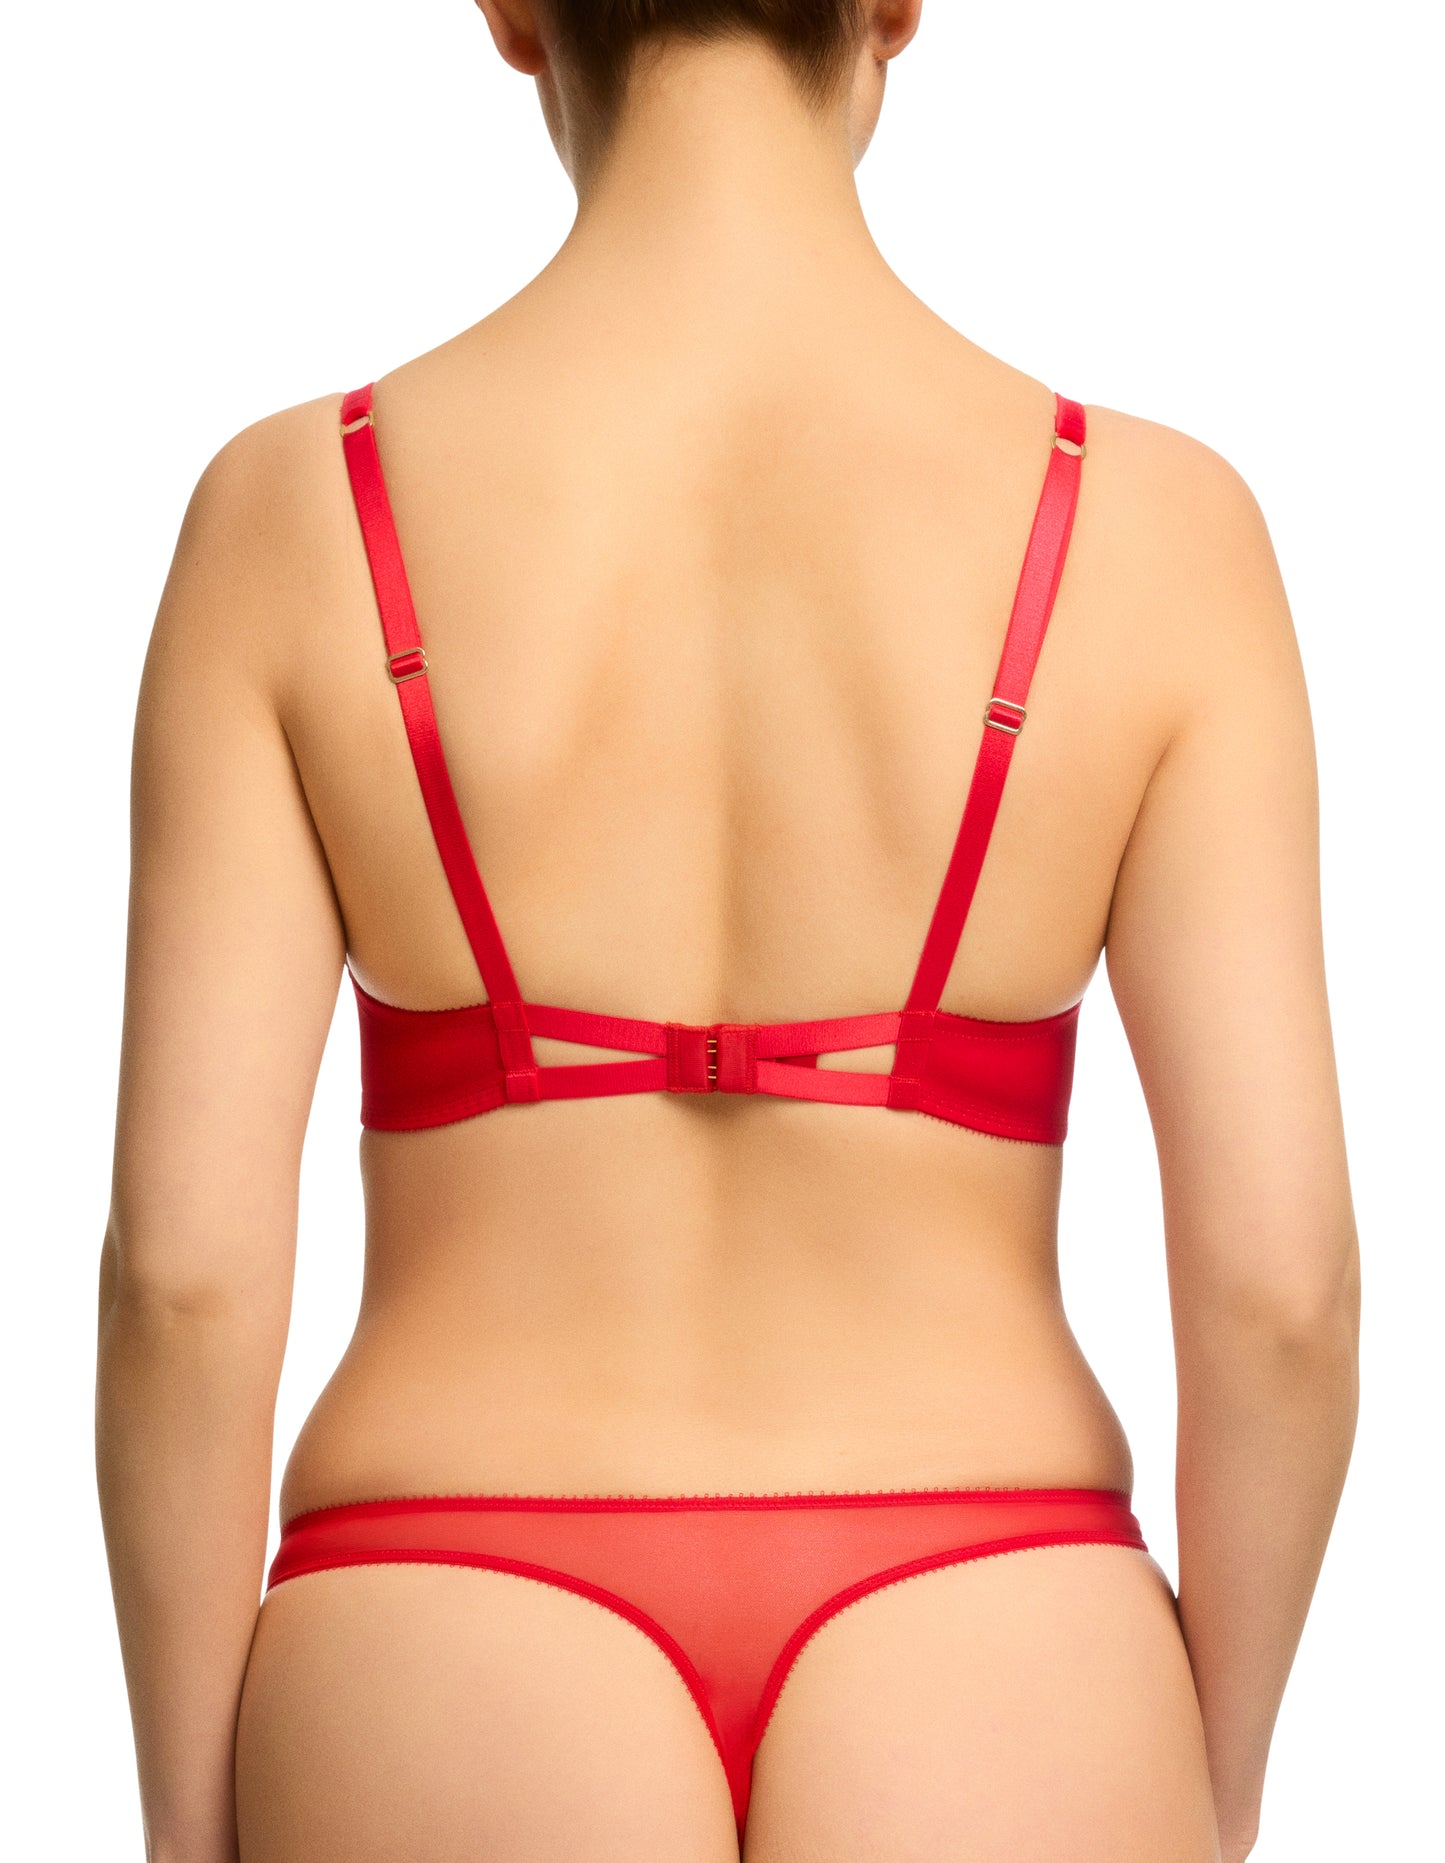 Vedette In Flame Red Balconette Bra By Dita Von Teese - 32-38 B-F (UK)